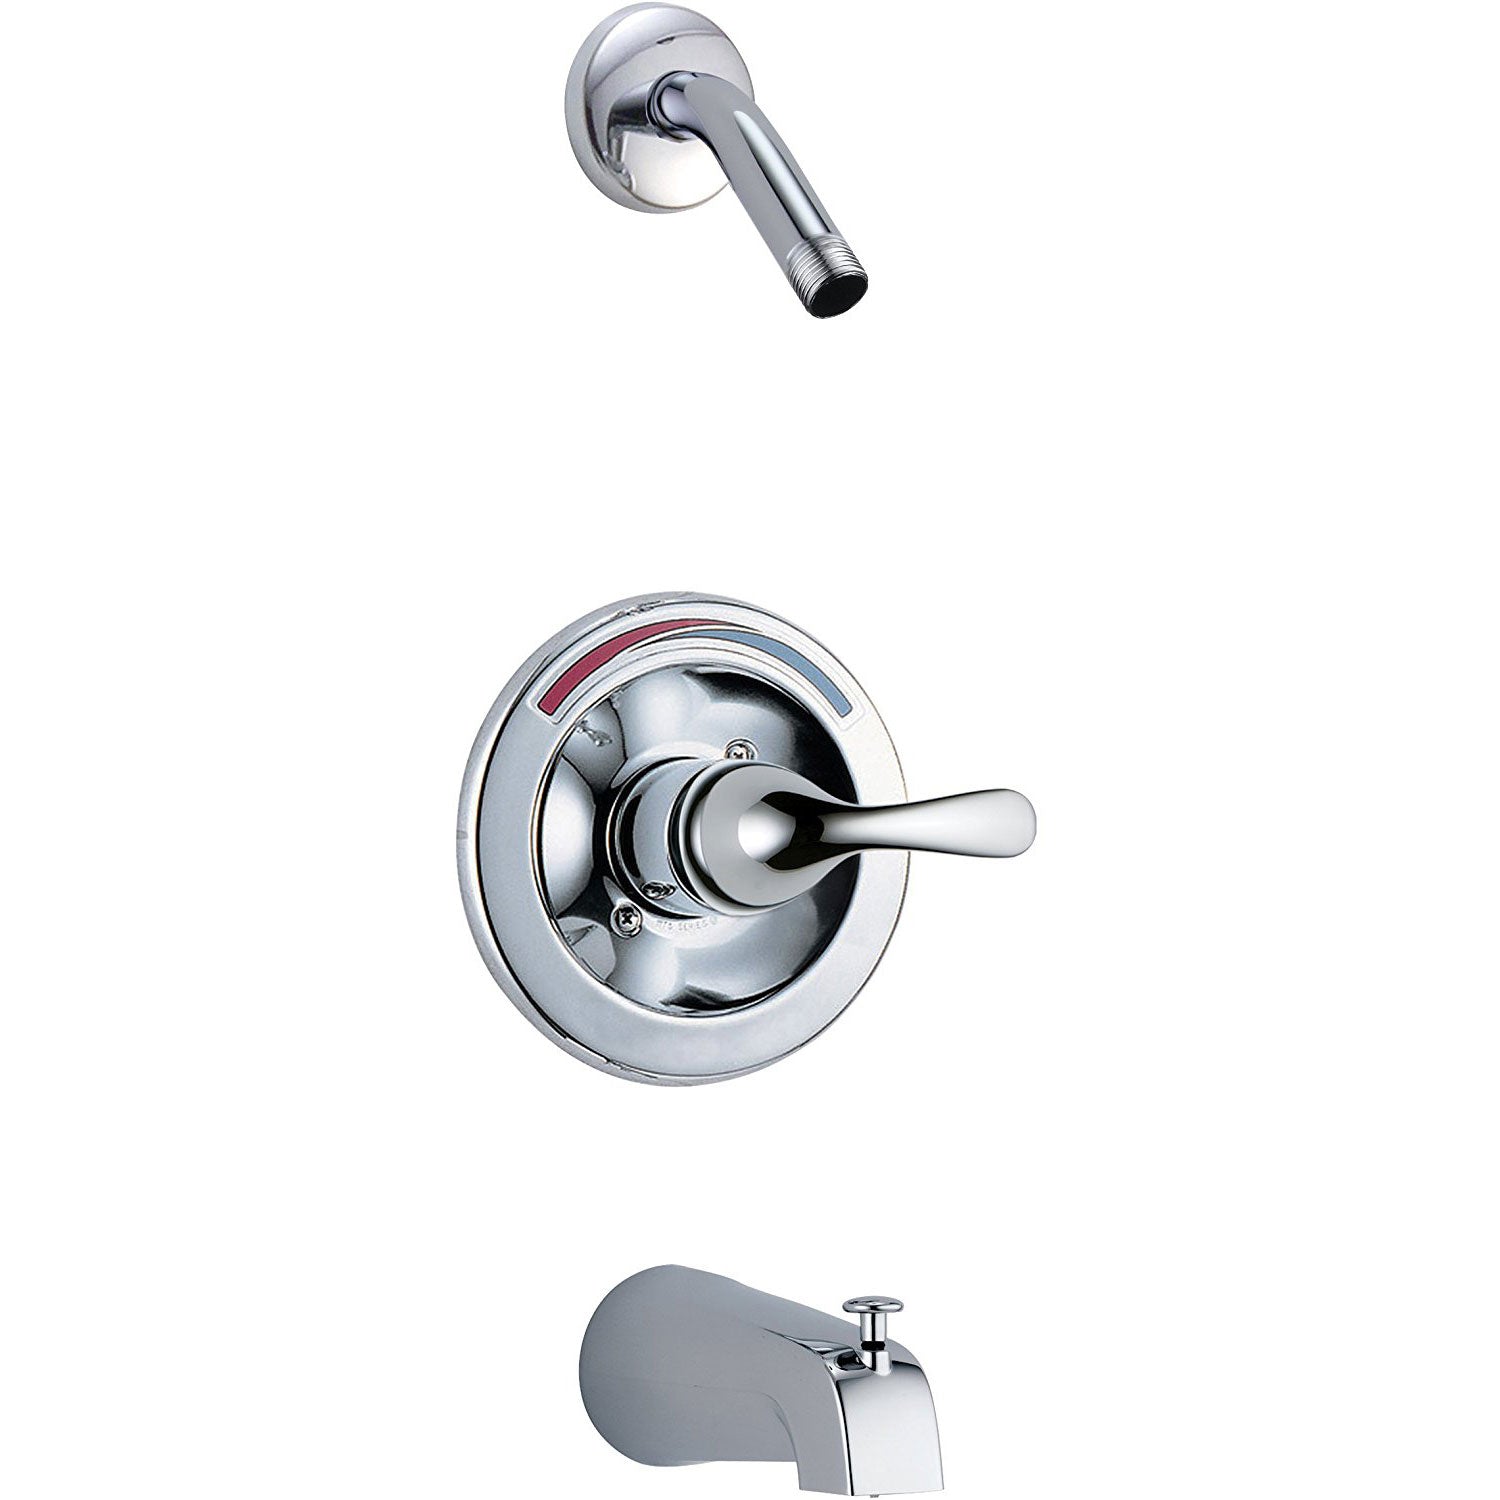 Delta Chrome Finish Monitor 13 Series Classic Style Single Handle Tub and Shower Faucet Trim Kit - Less Showerhead (Valve Sold Separately) DT13491LHD